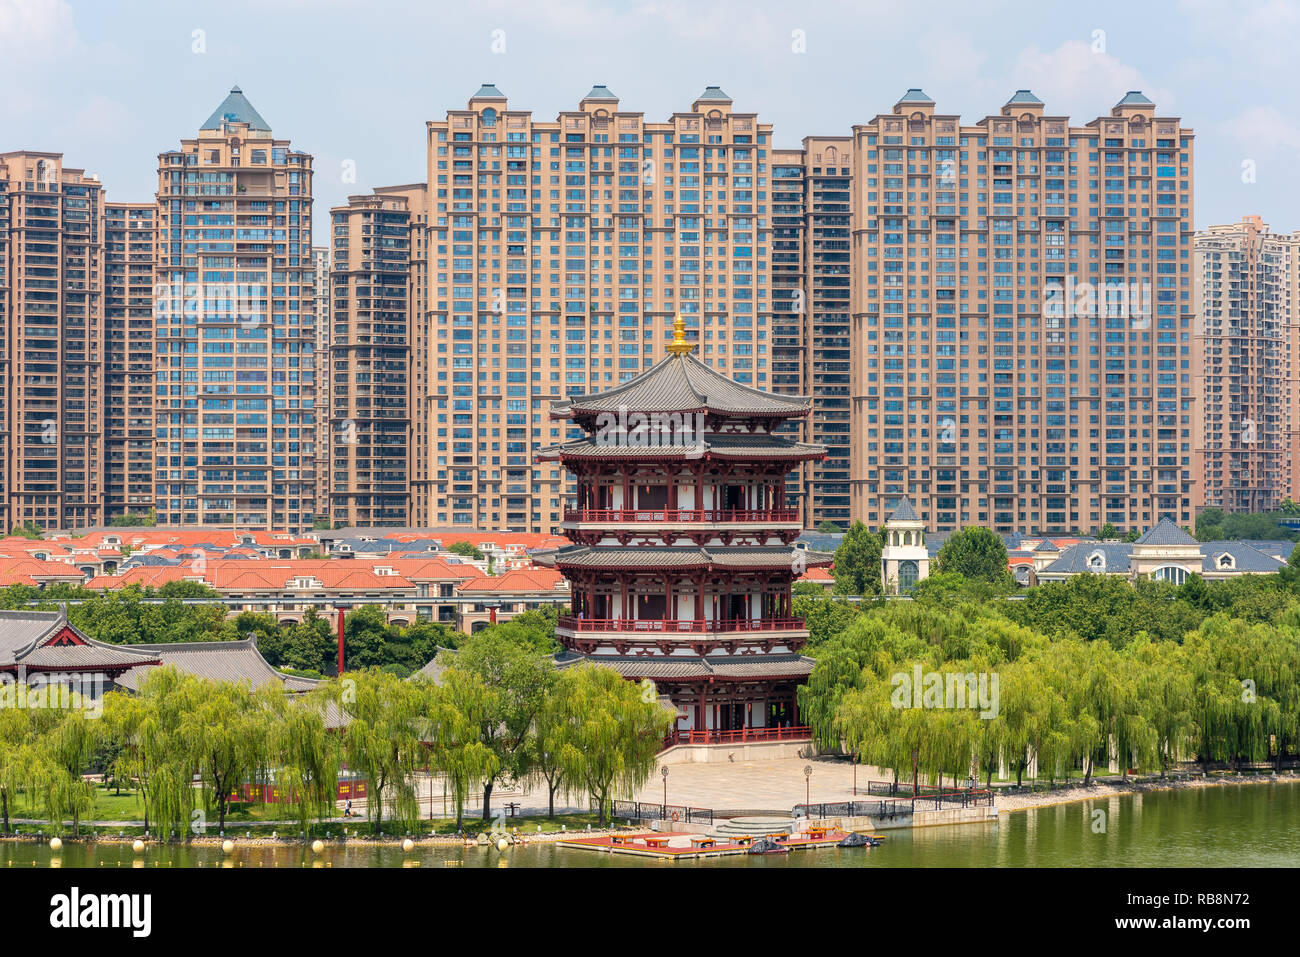 Xi'an, Shaanxi province, China - Aug 12, 2018 : Pagoda against buildings aerial view in Tang paradise park Stock Photo